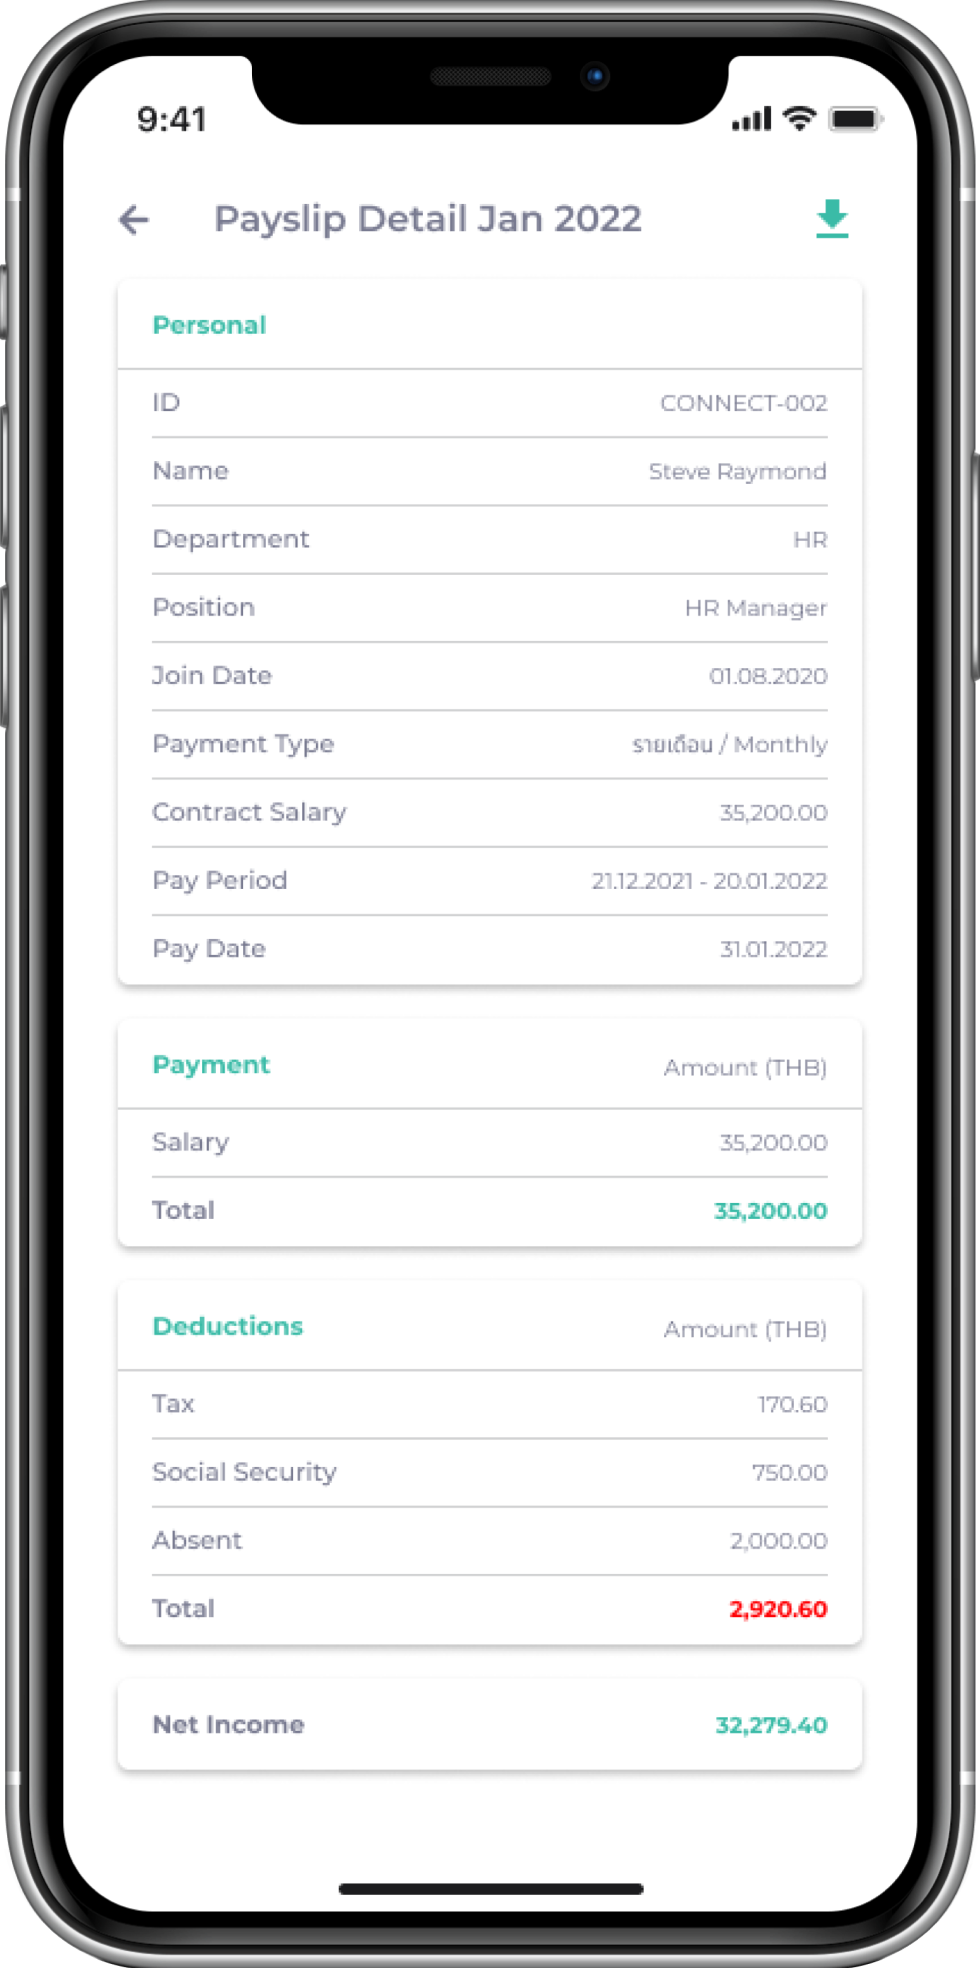 Employees can view ePayslip from mobile app